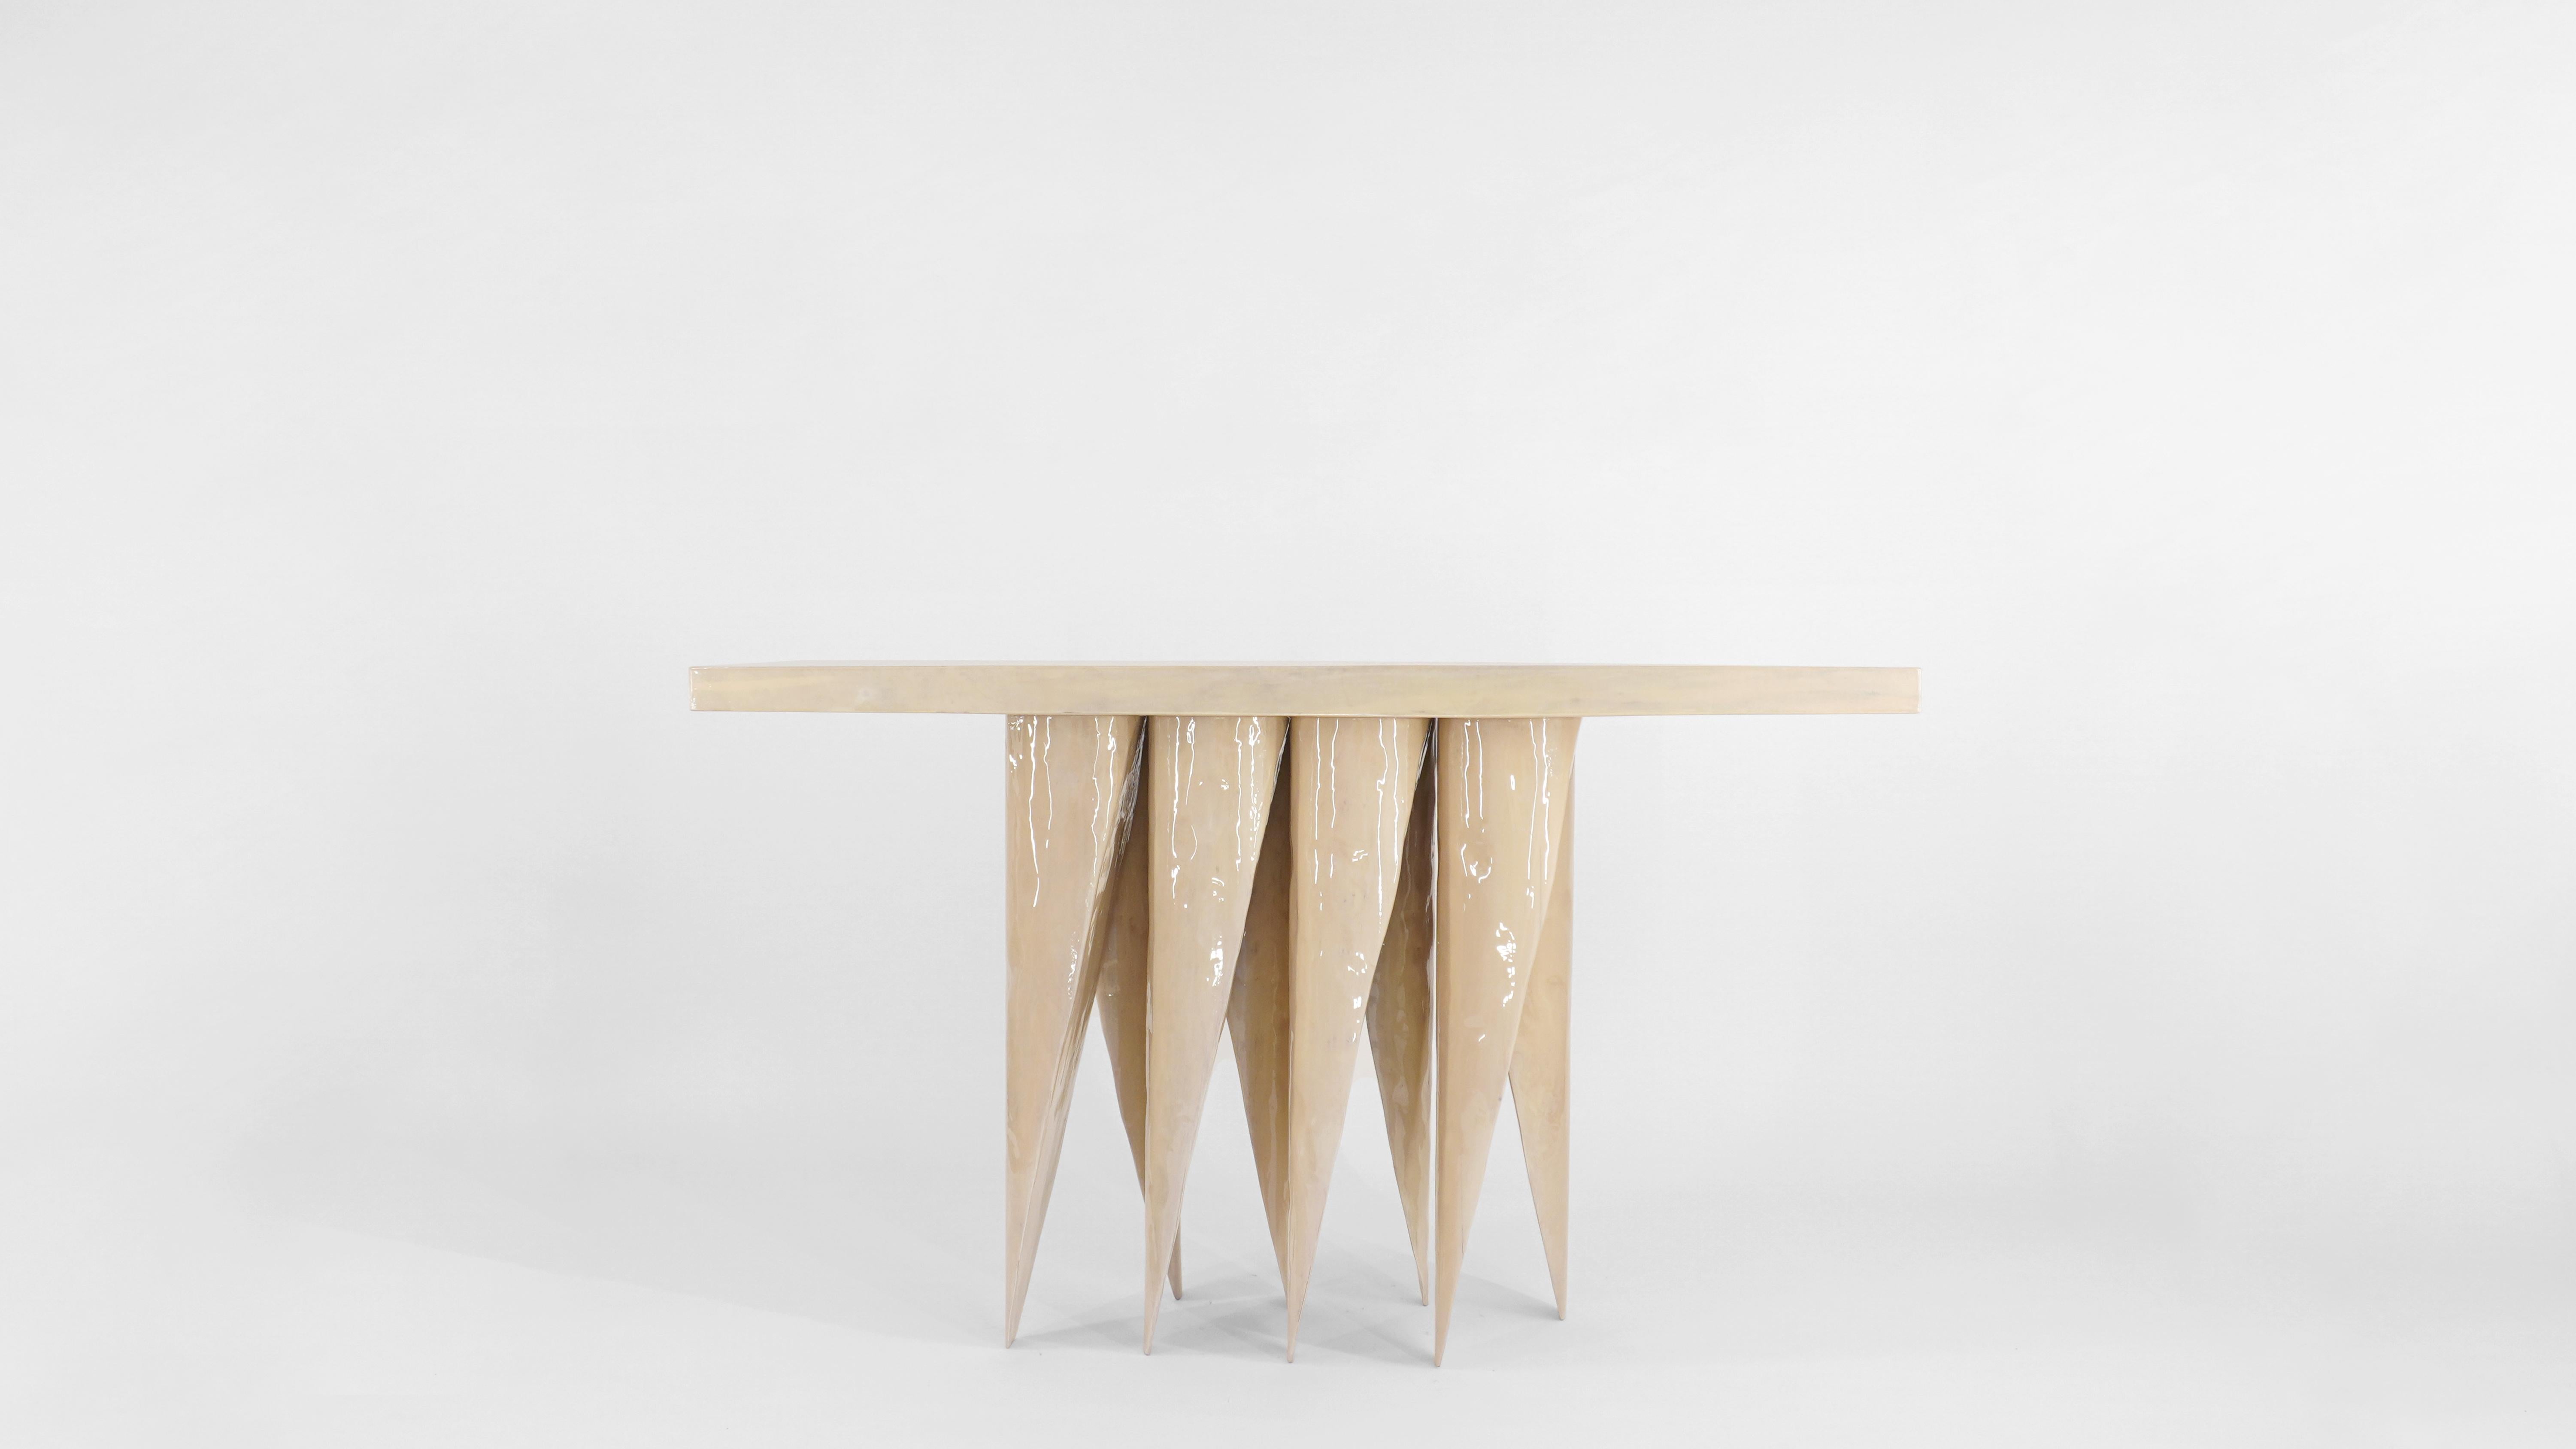 Obeisance Console Table by Henry D'ath
Dimensions: D 150 x W 45 x H 85 cm
Materials: Wood.

Piece is handmade by artist.

Like its smaller counterpart, the Obeisance console table rests on eight overlapping legs. From most angles the table appears